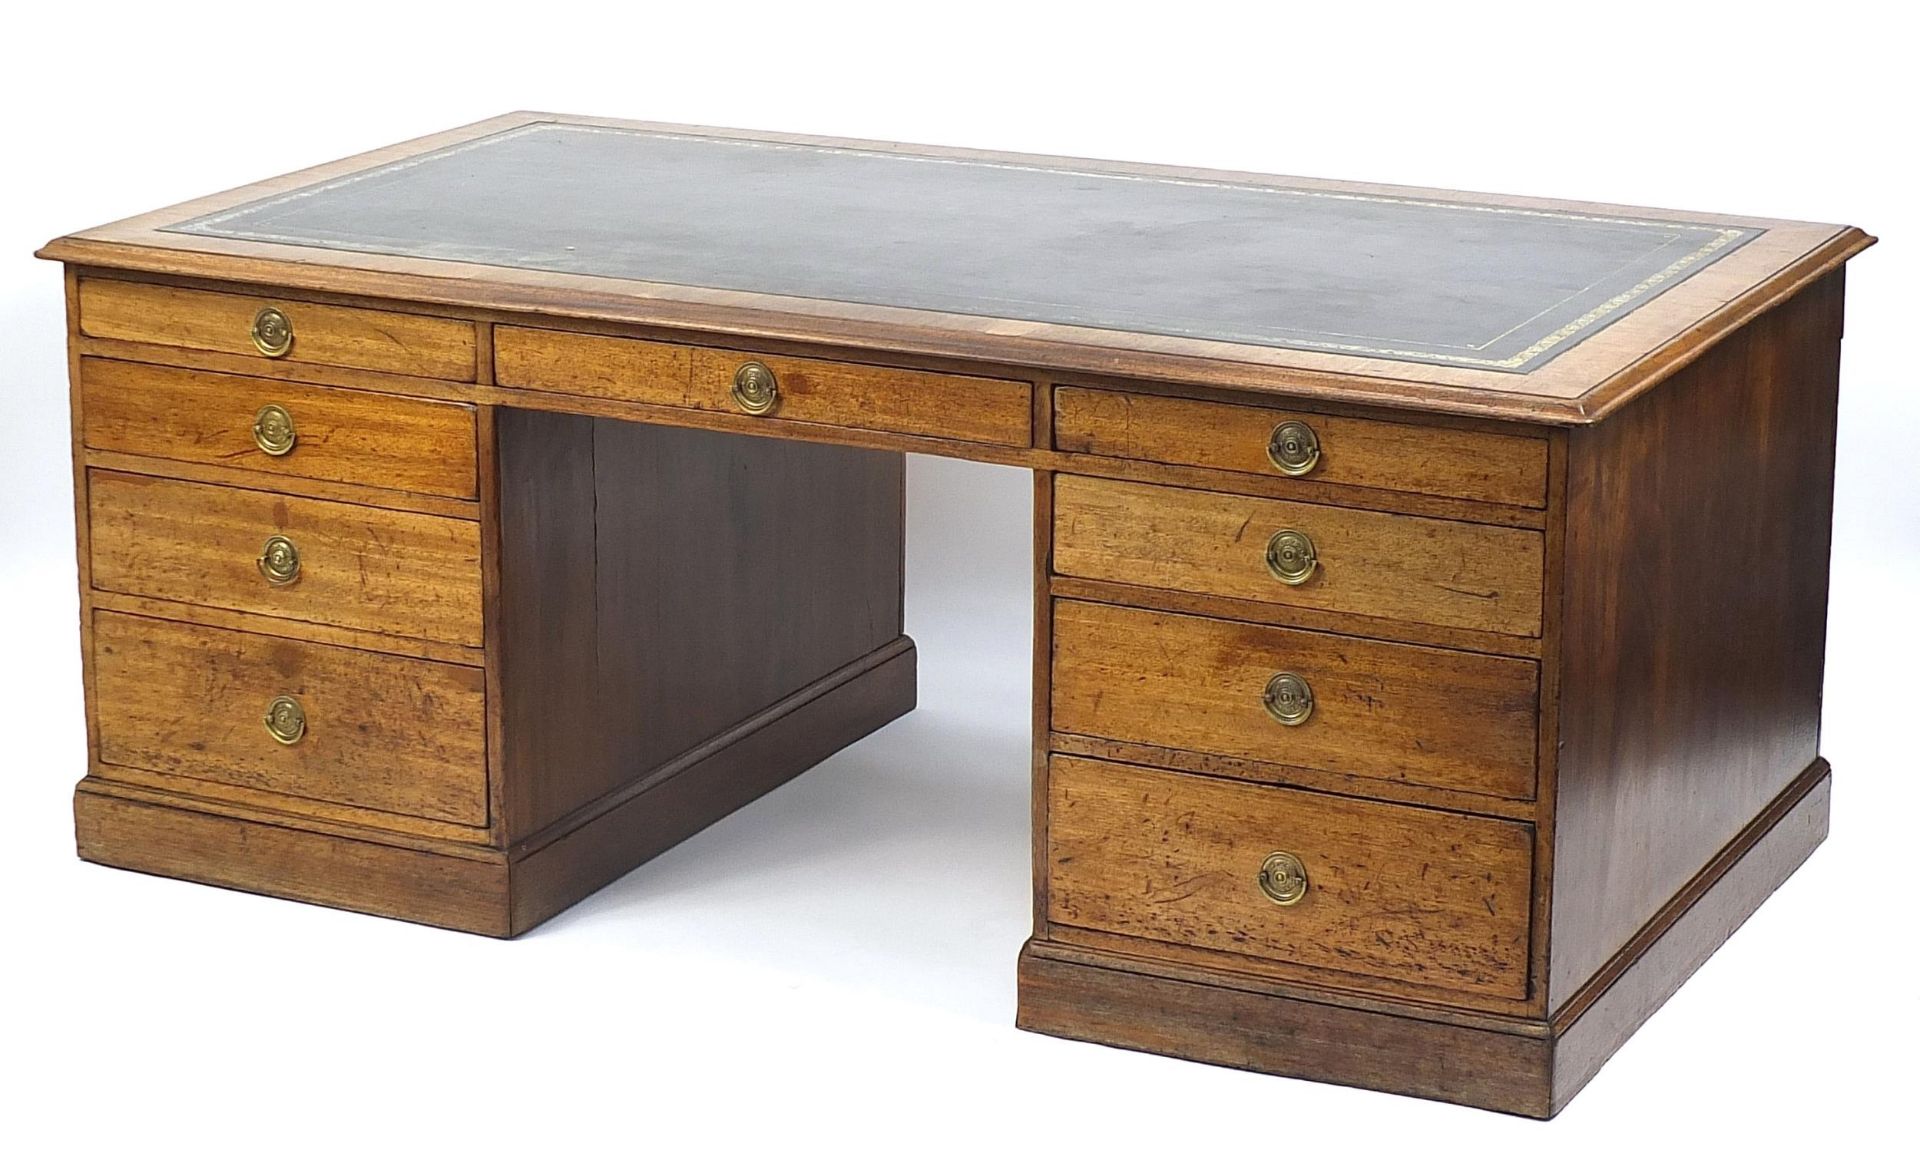 Large oak partner's desk with black leather insert above a series of drawers, reputedly Boris